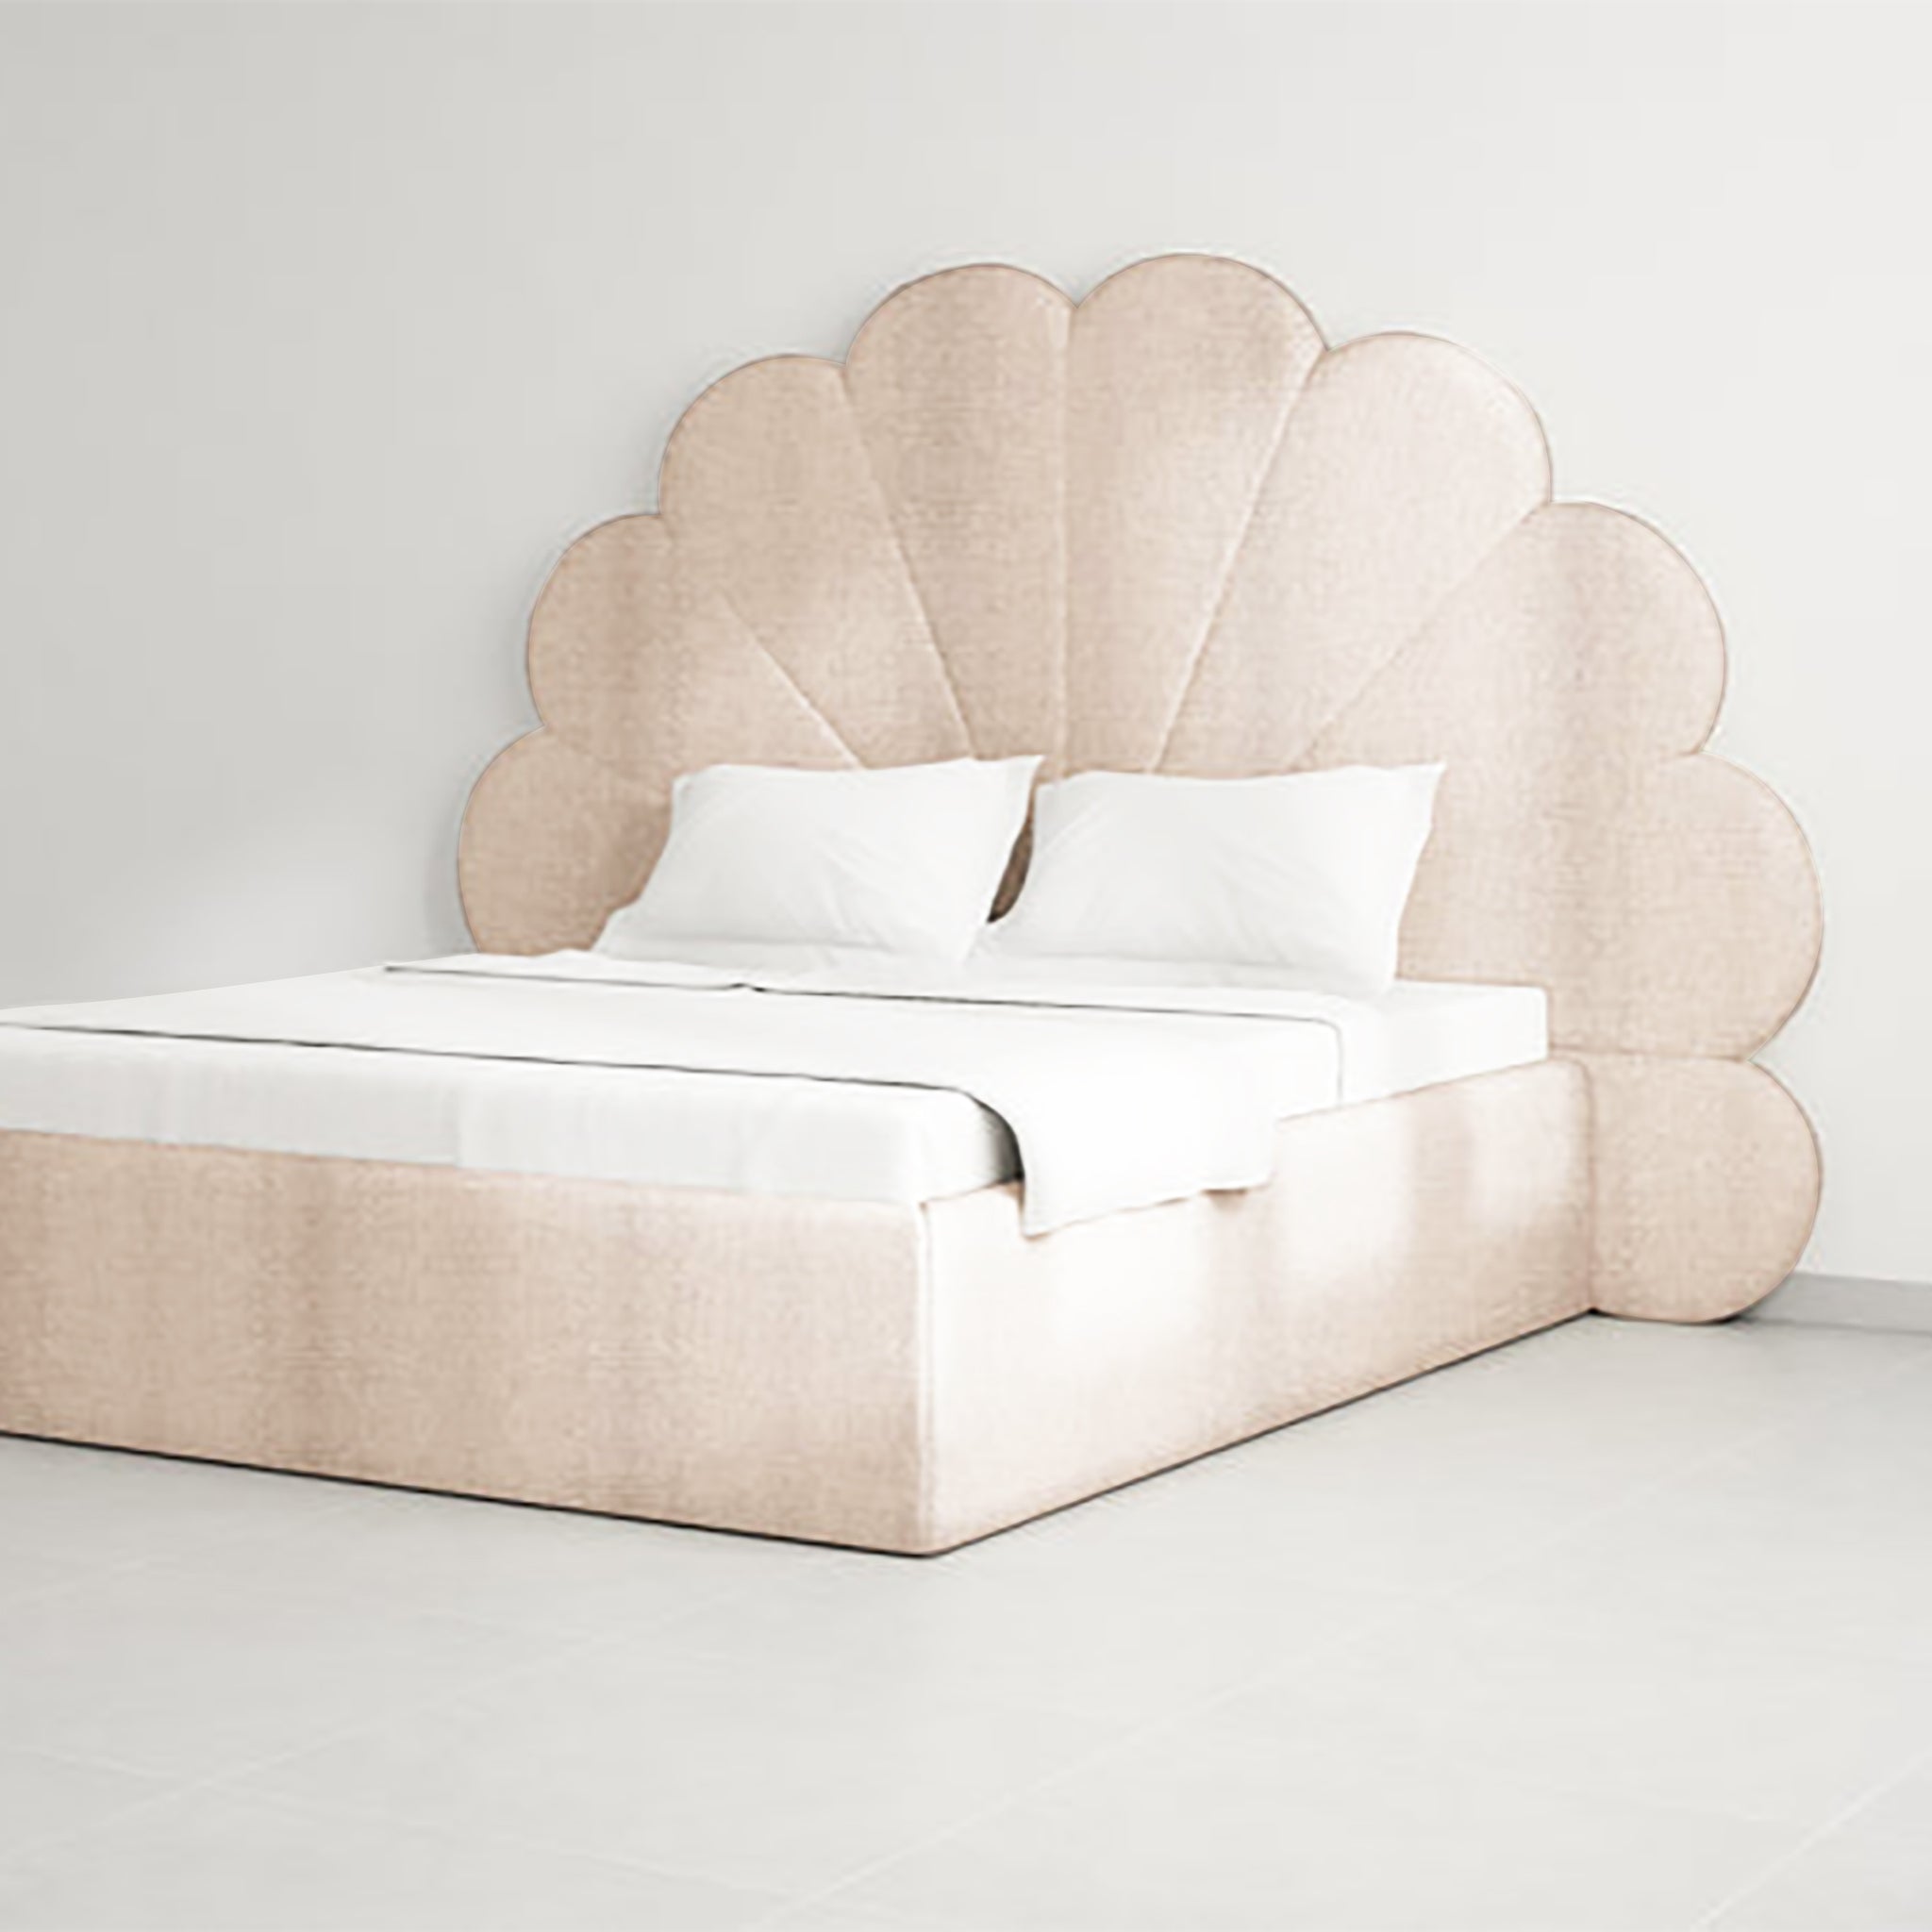 Customizable Kyle Bed for stylish master bedrooms